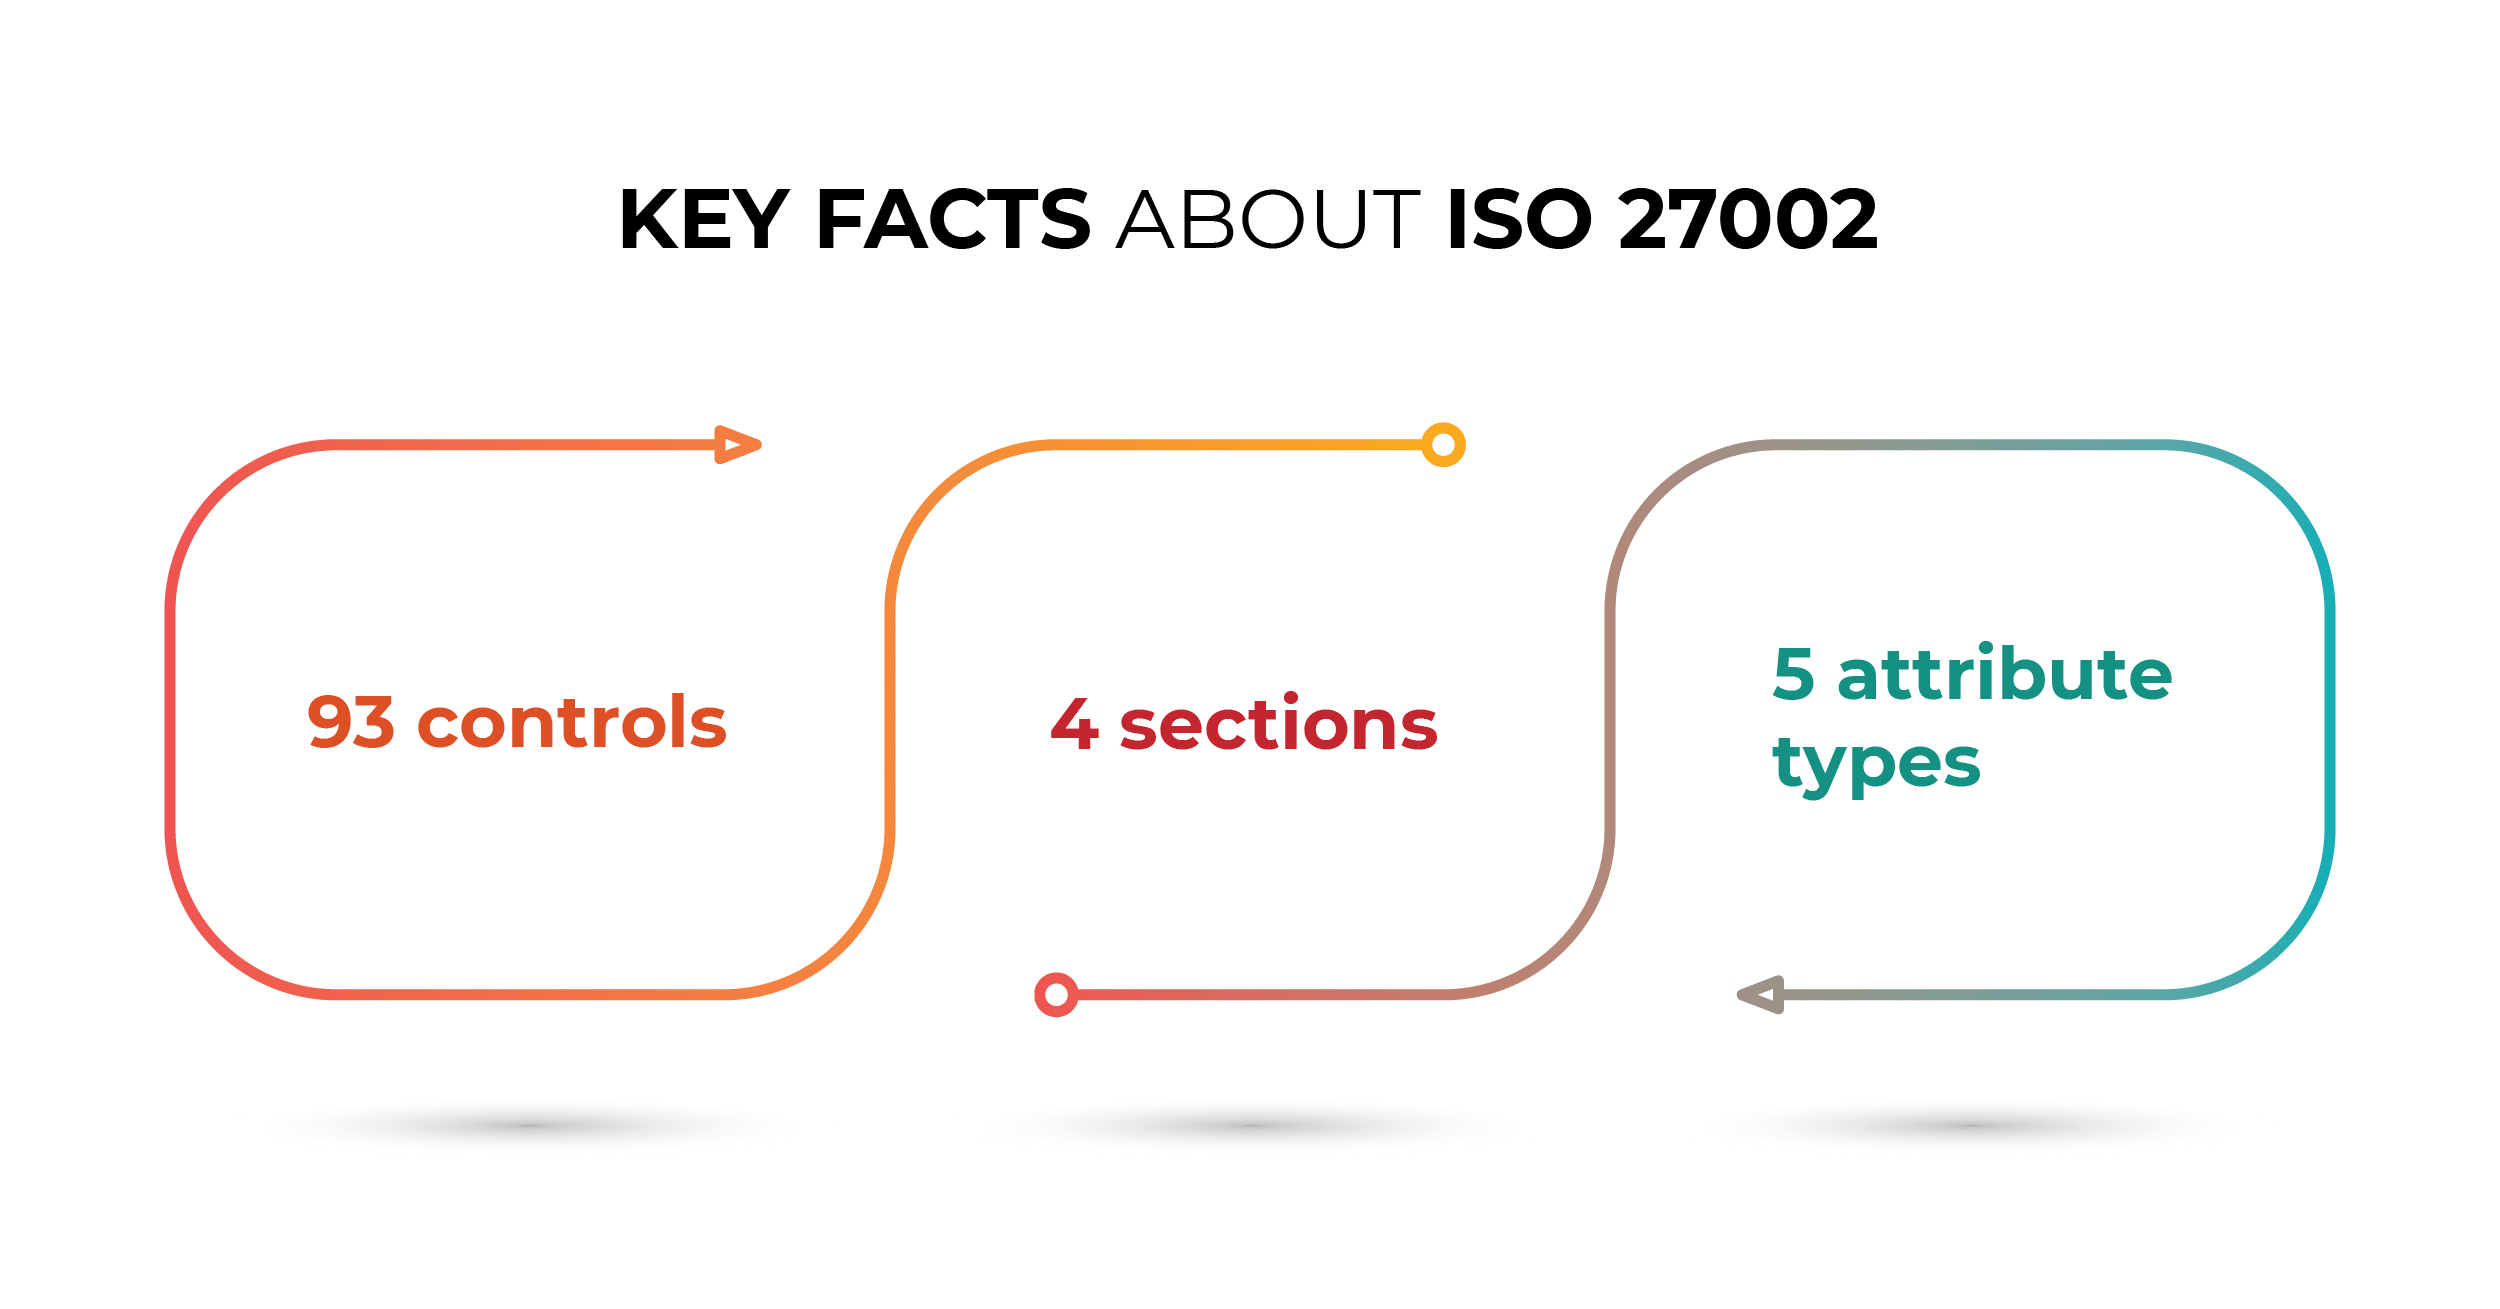 Key facts about ISO 27002